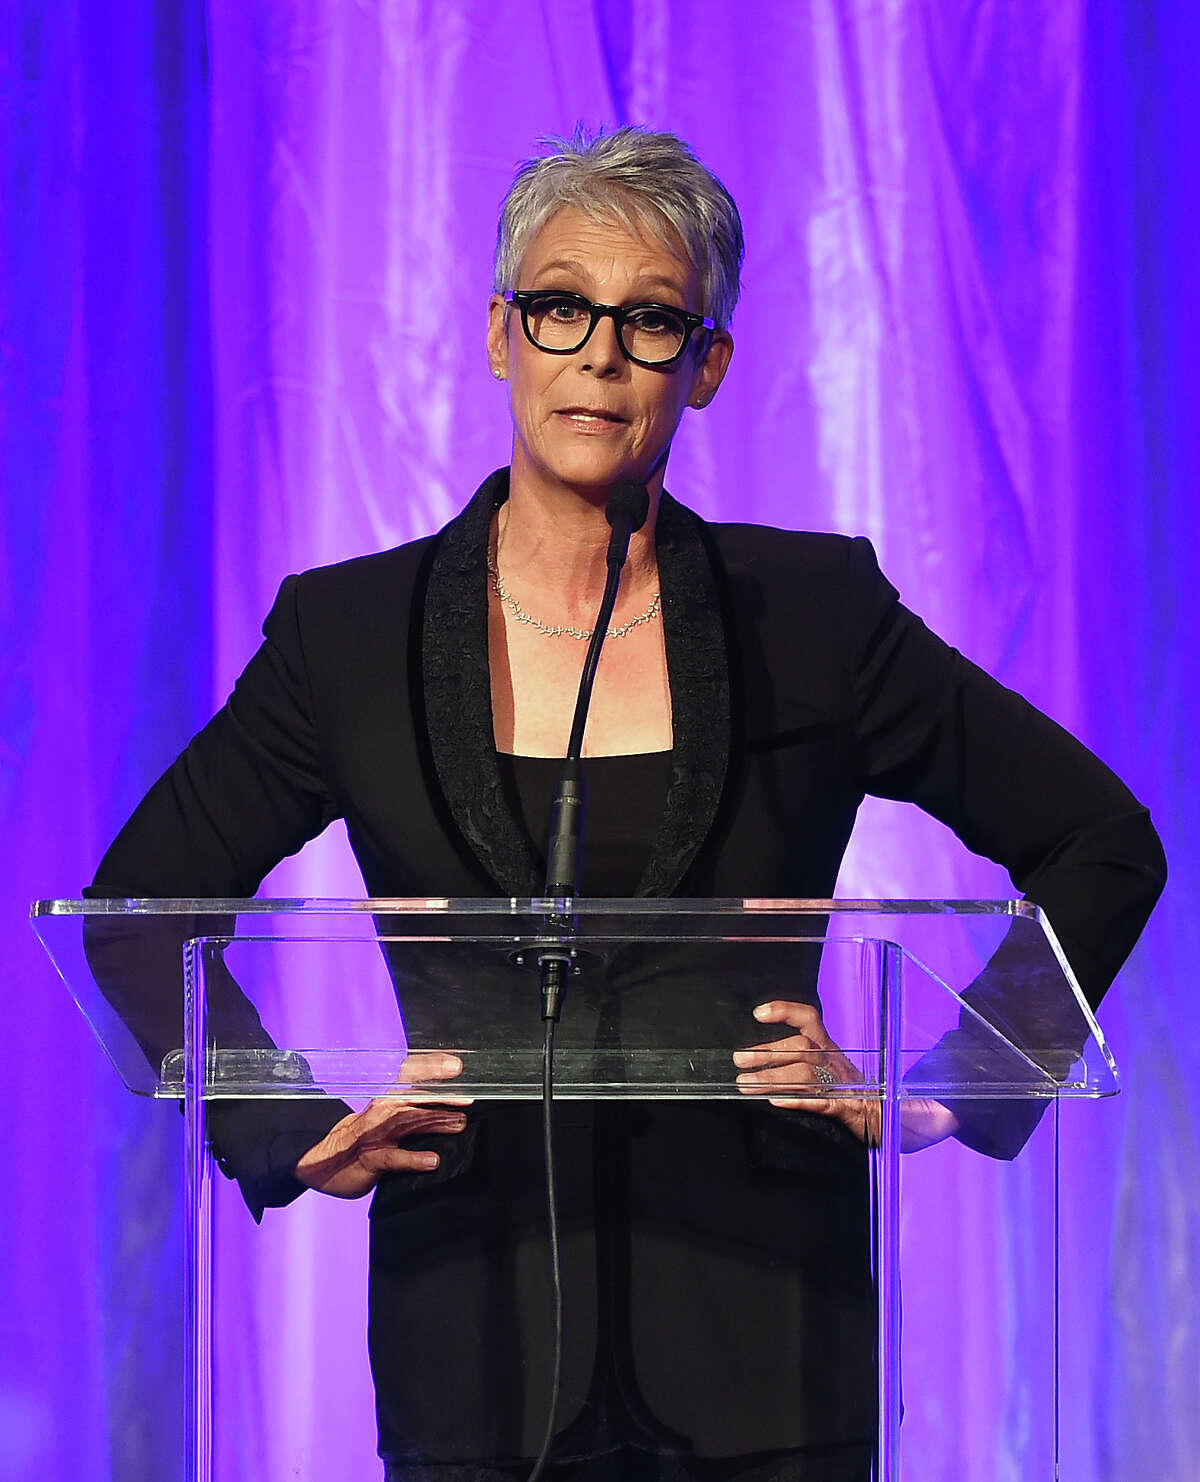 BEVERLY HILLS, CA - AUGUST 04: Host Jamie Lee Curtis speaks onstage at the Hollywood Foreign Press Association's Grants Banquet at the Beverly Wilshire Four Seasons Hotel on August 4, 2016 in Beverly Hills, California. (Photo by Kevin Winter/Getty Images)